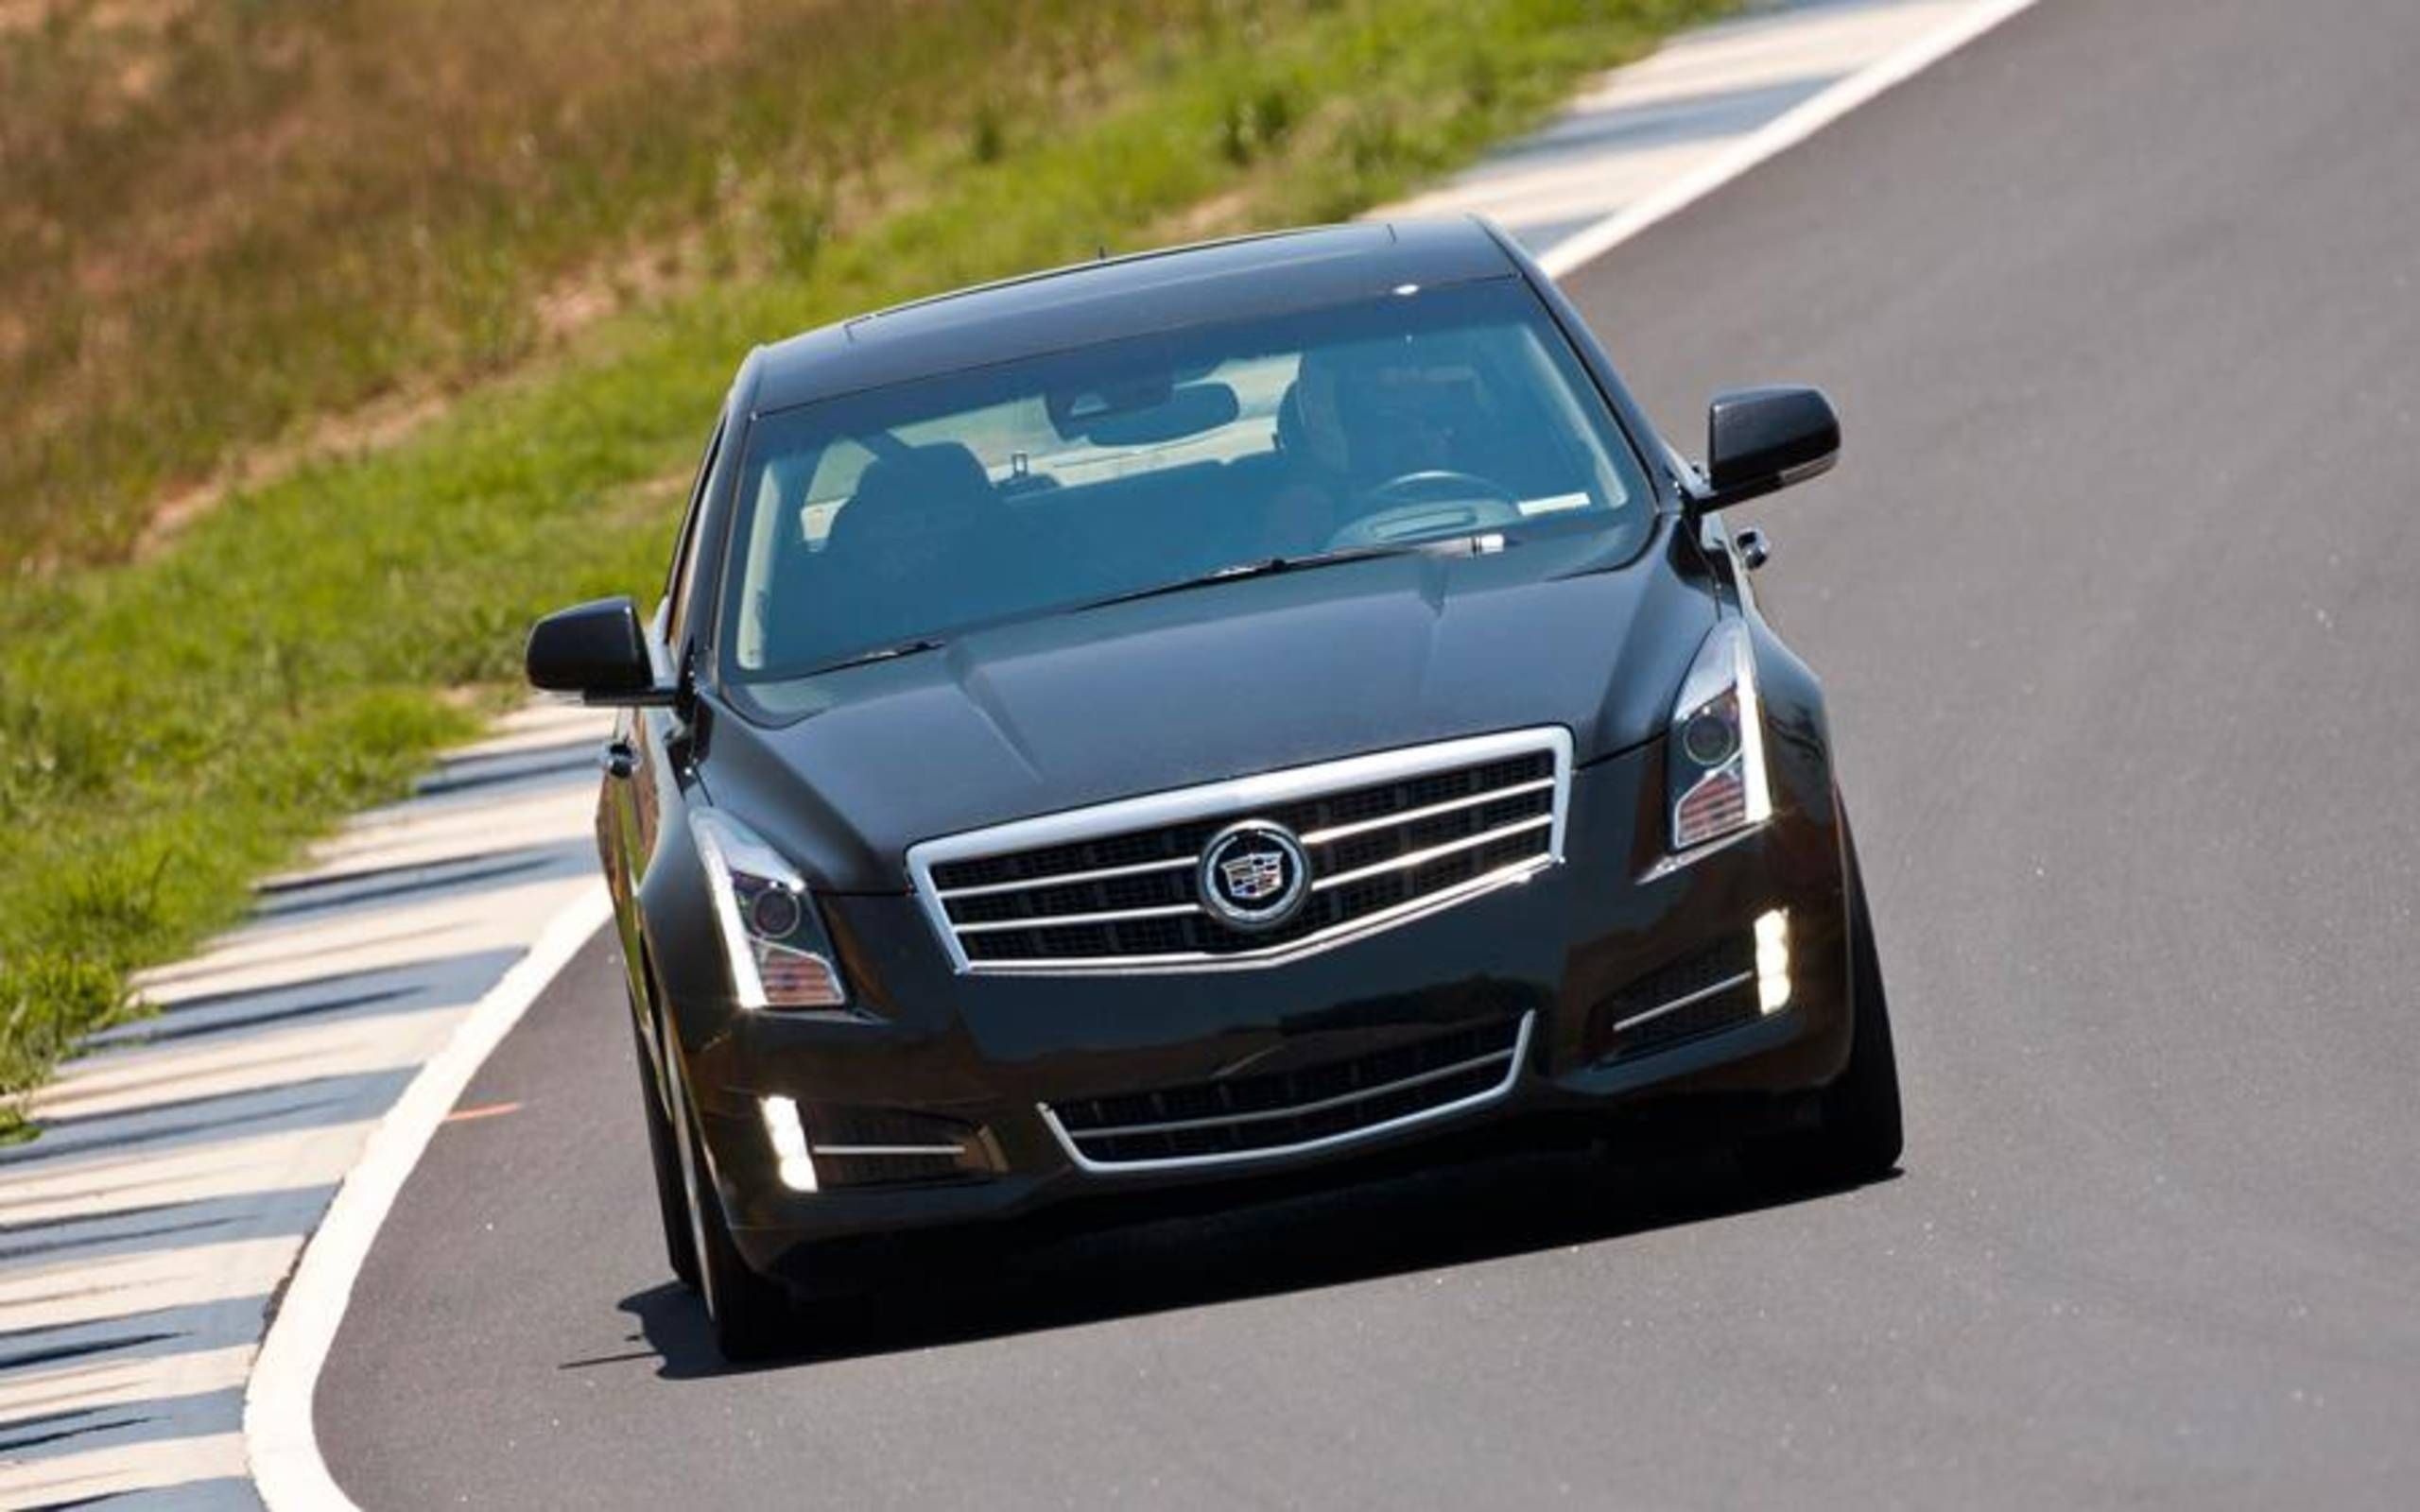 2013 Cadillac ATS 3.6L Premium Collection review notes